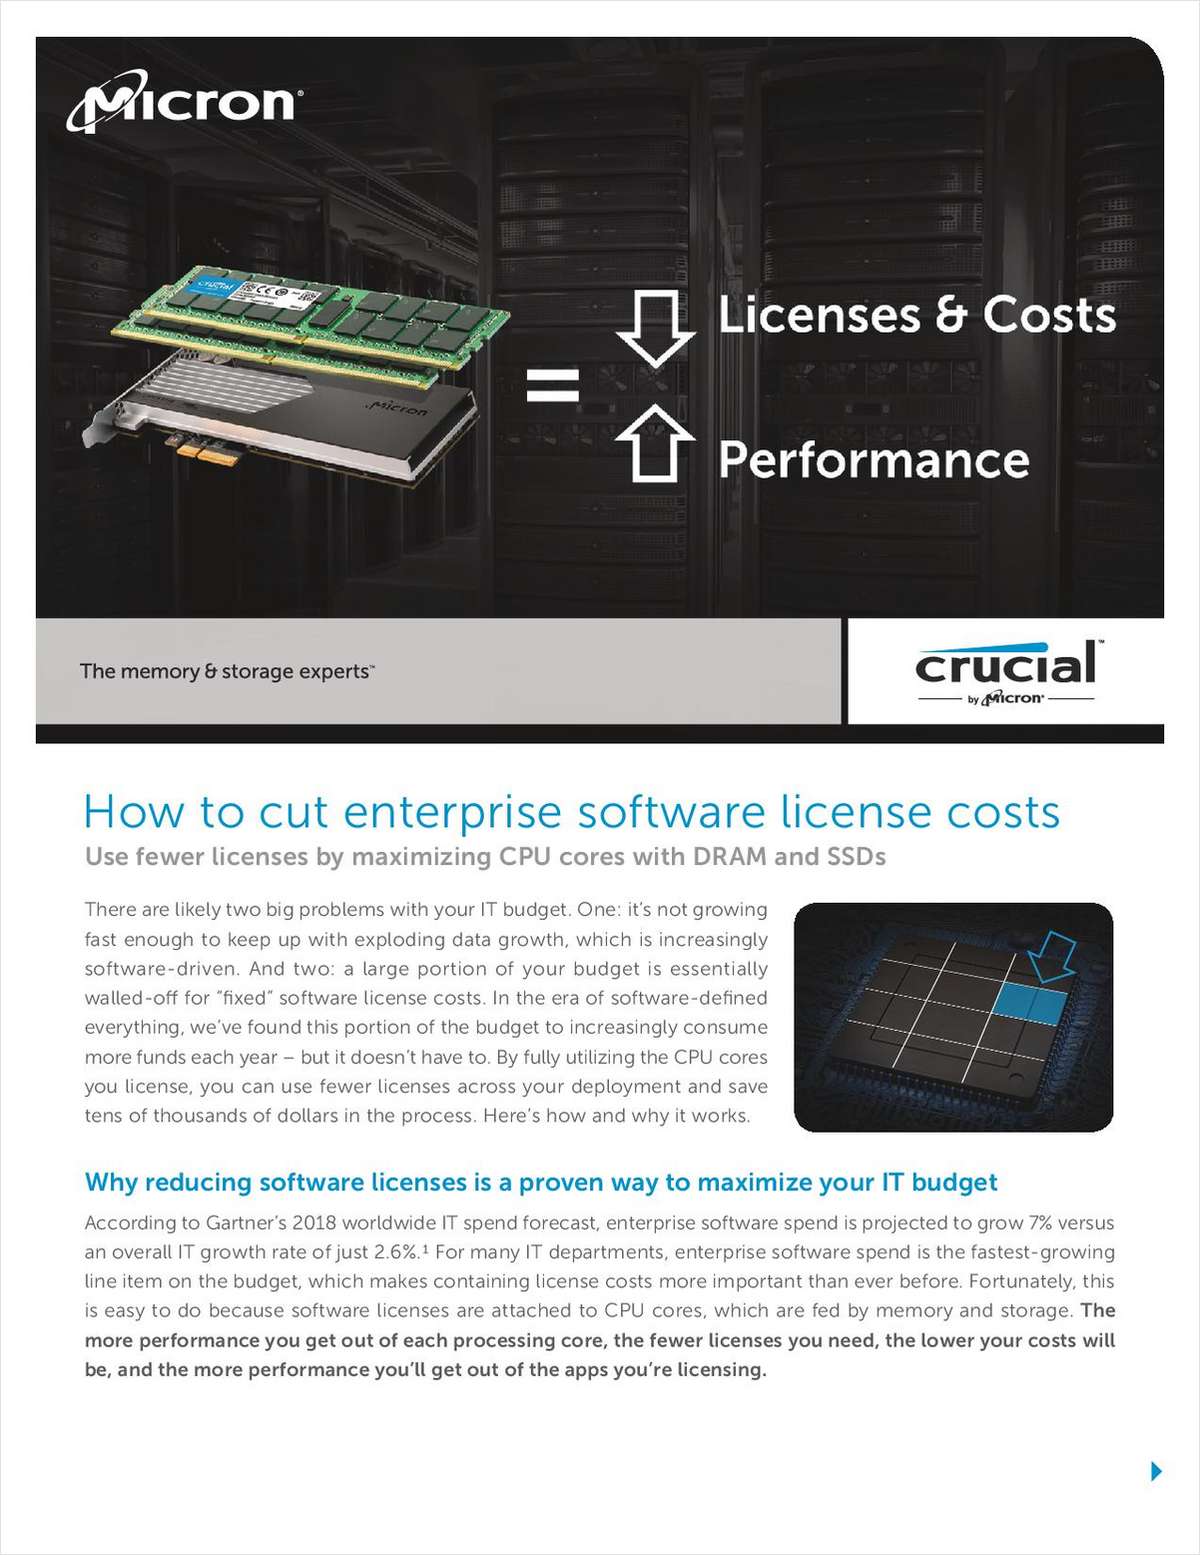 How to Cut Enterprise Software License Costs